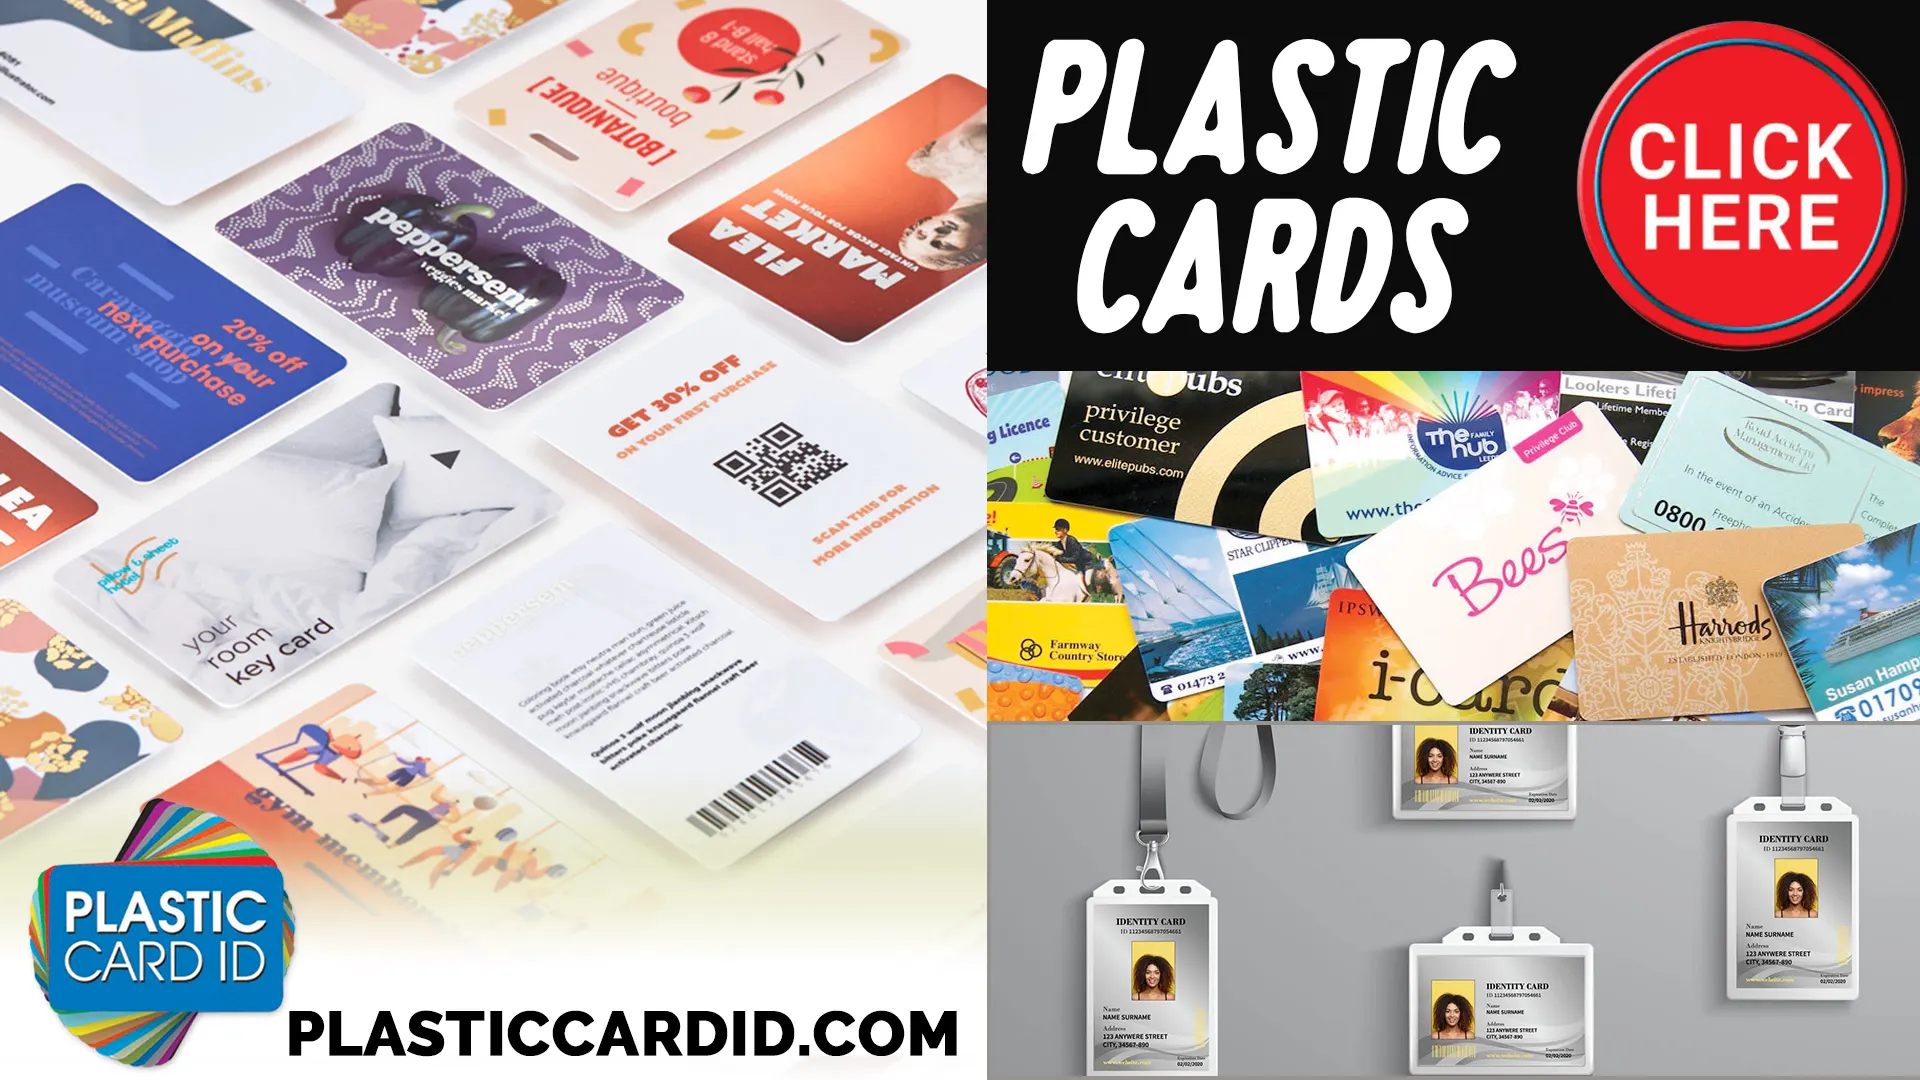 Welcome to Plastic Card ID
: Your Trusted Partner in Navigating Regulatory Changes in Card Printing